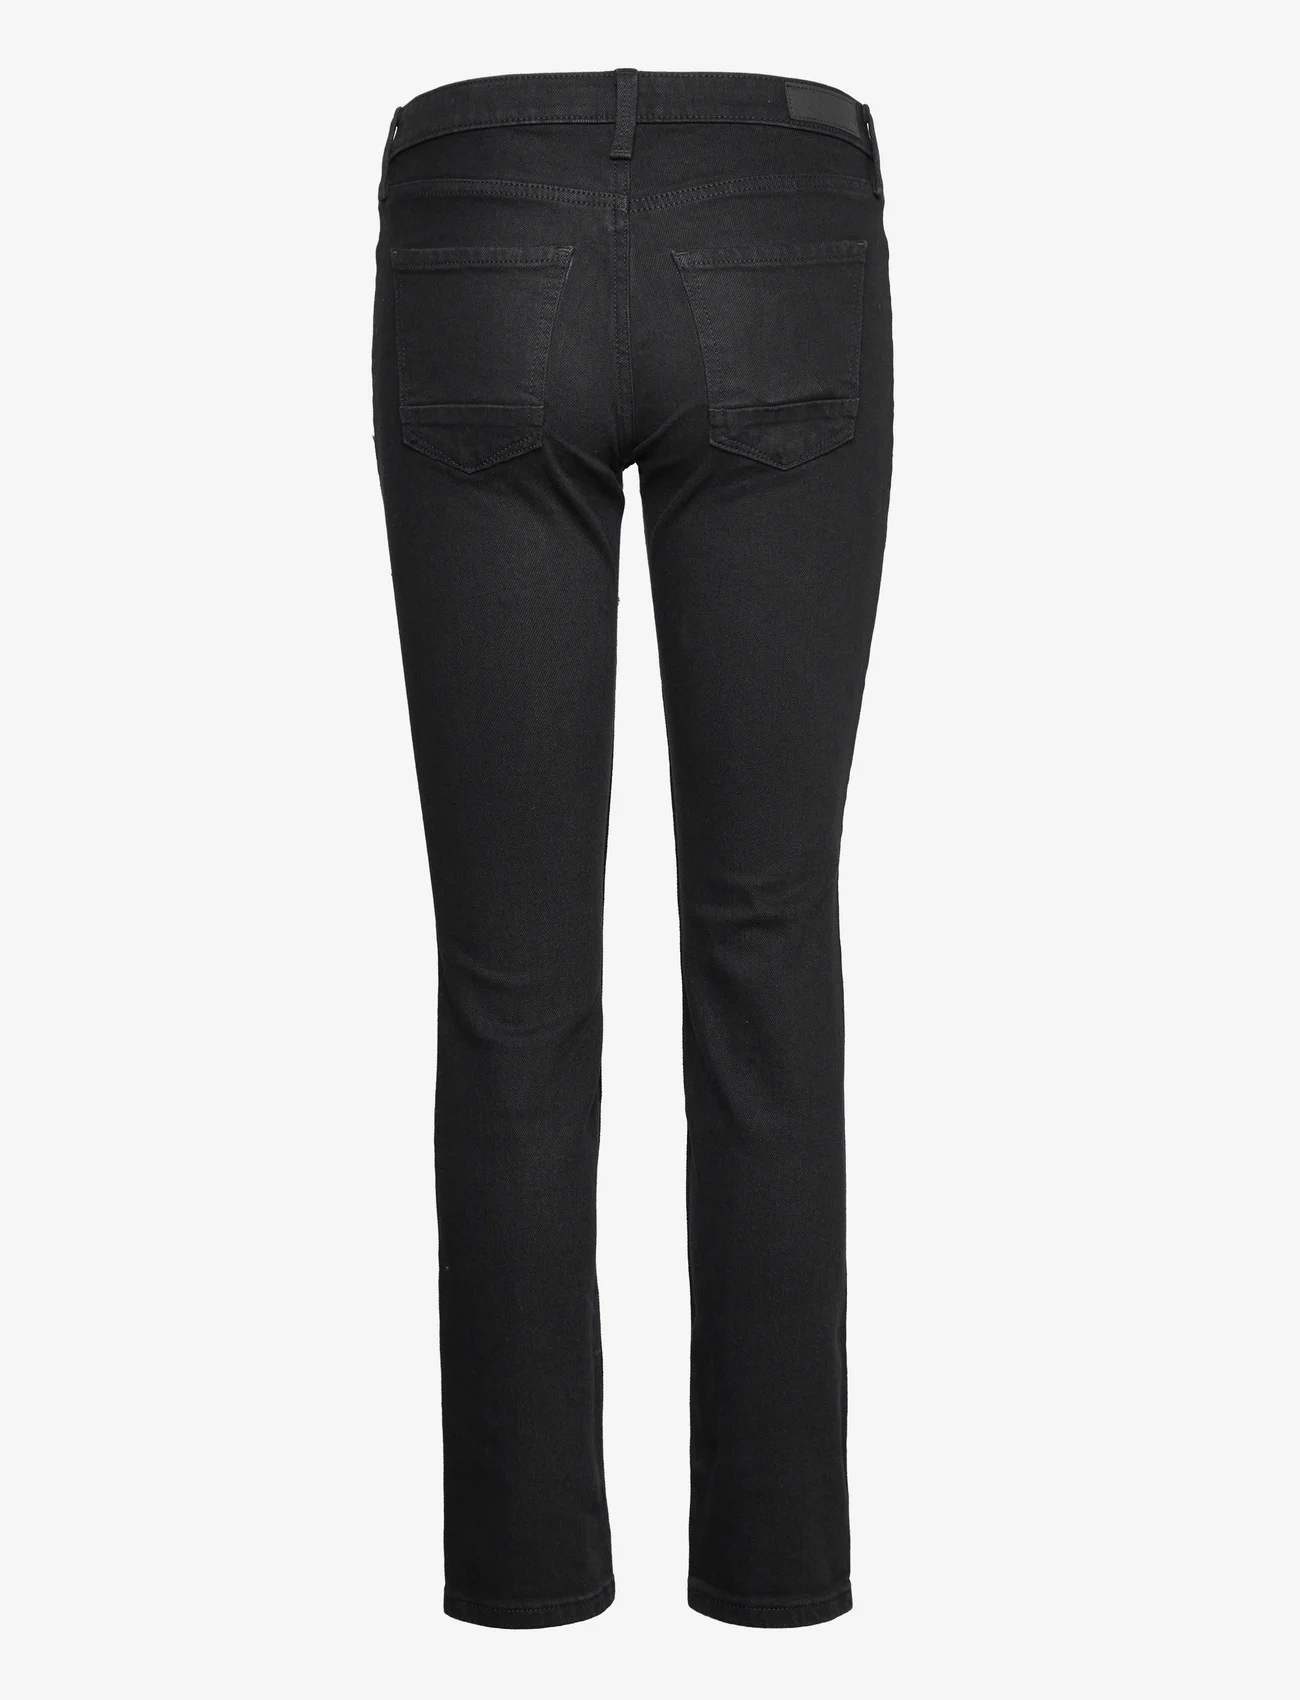 Esprit Casual - Straight leg stretch jeans - straight jeans - black rinse - 1